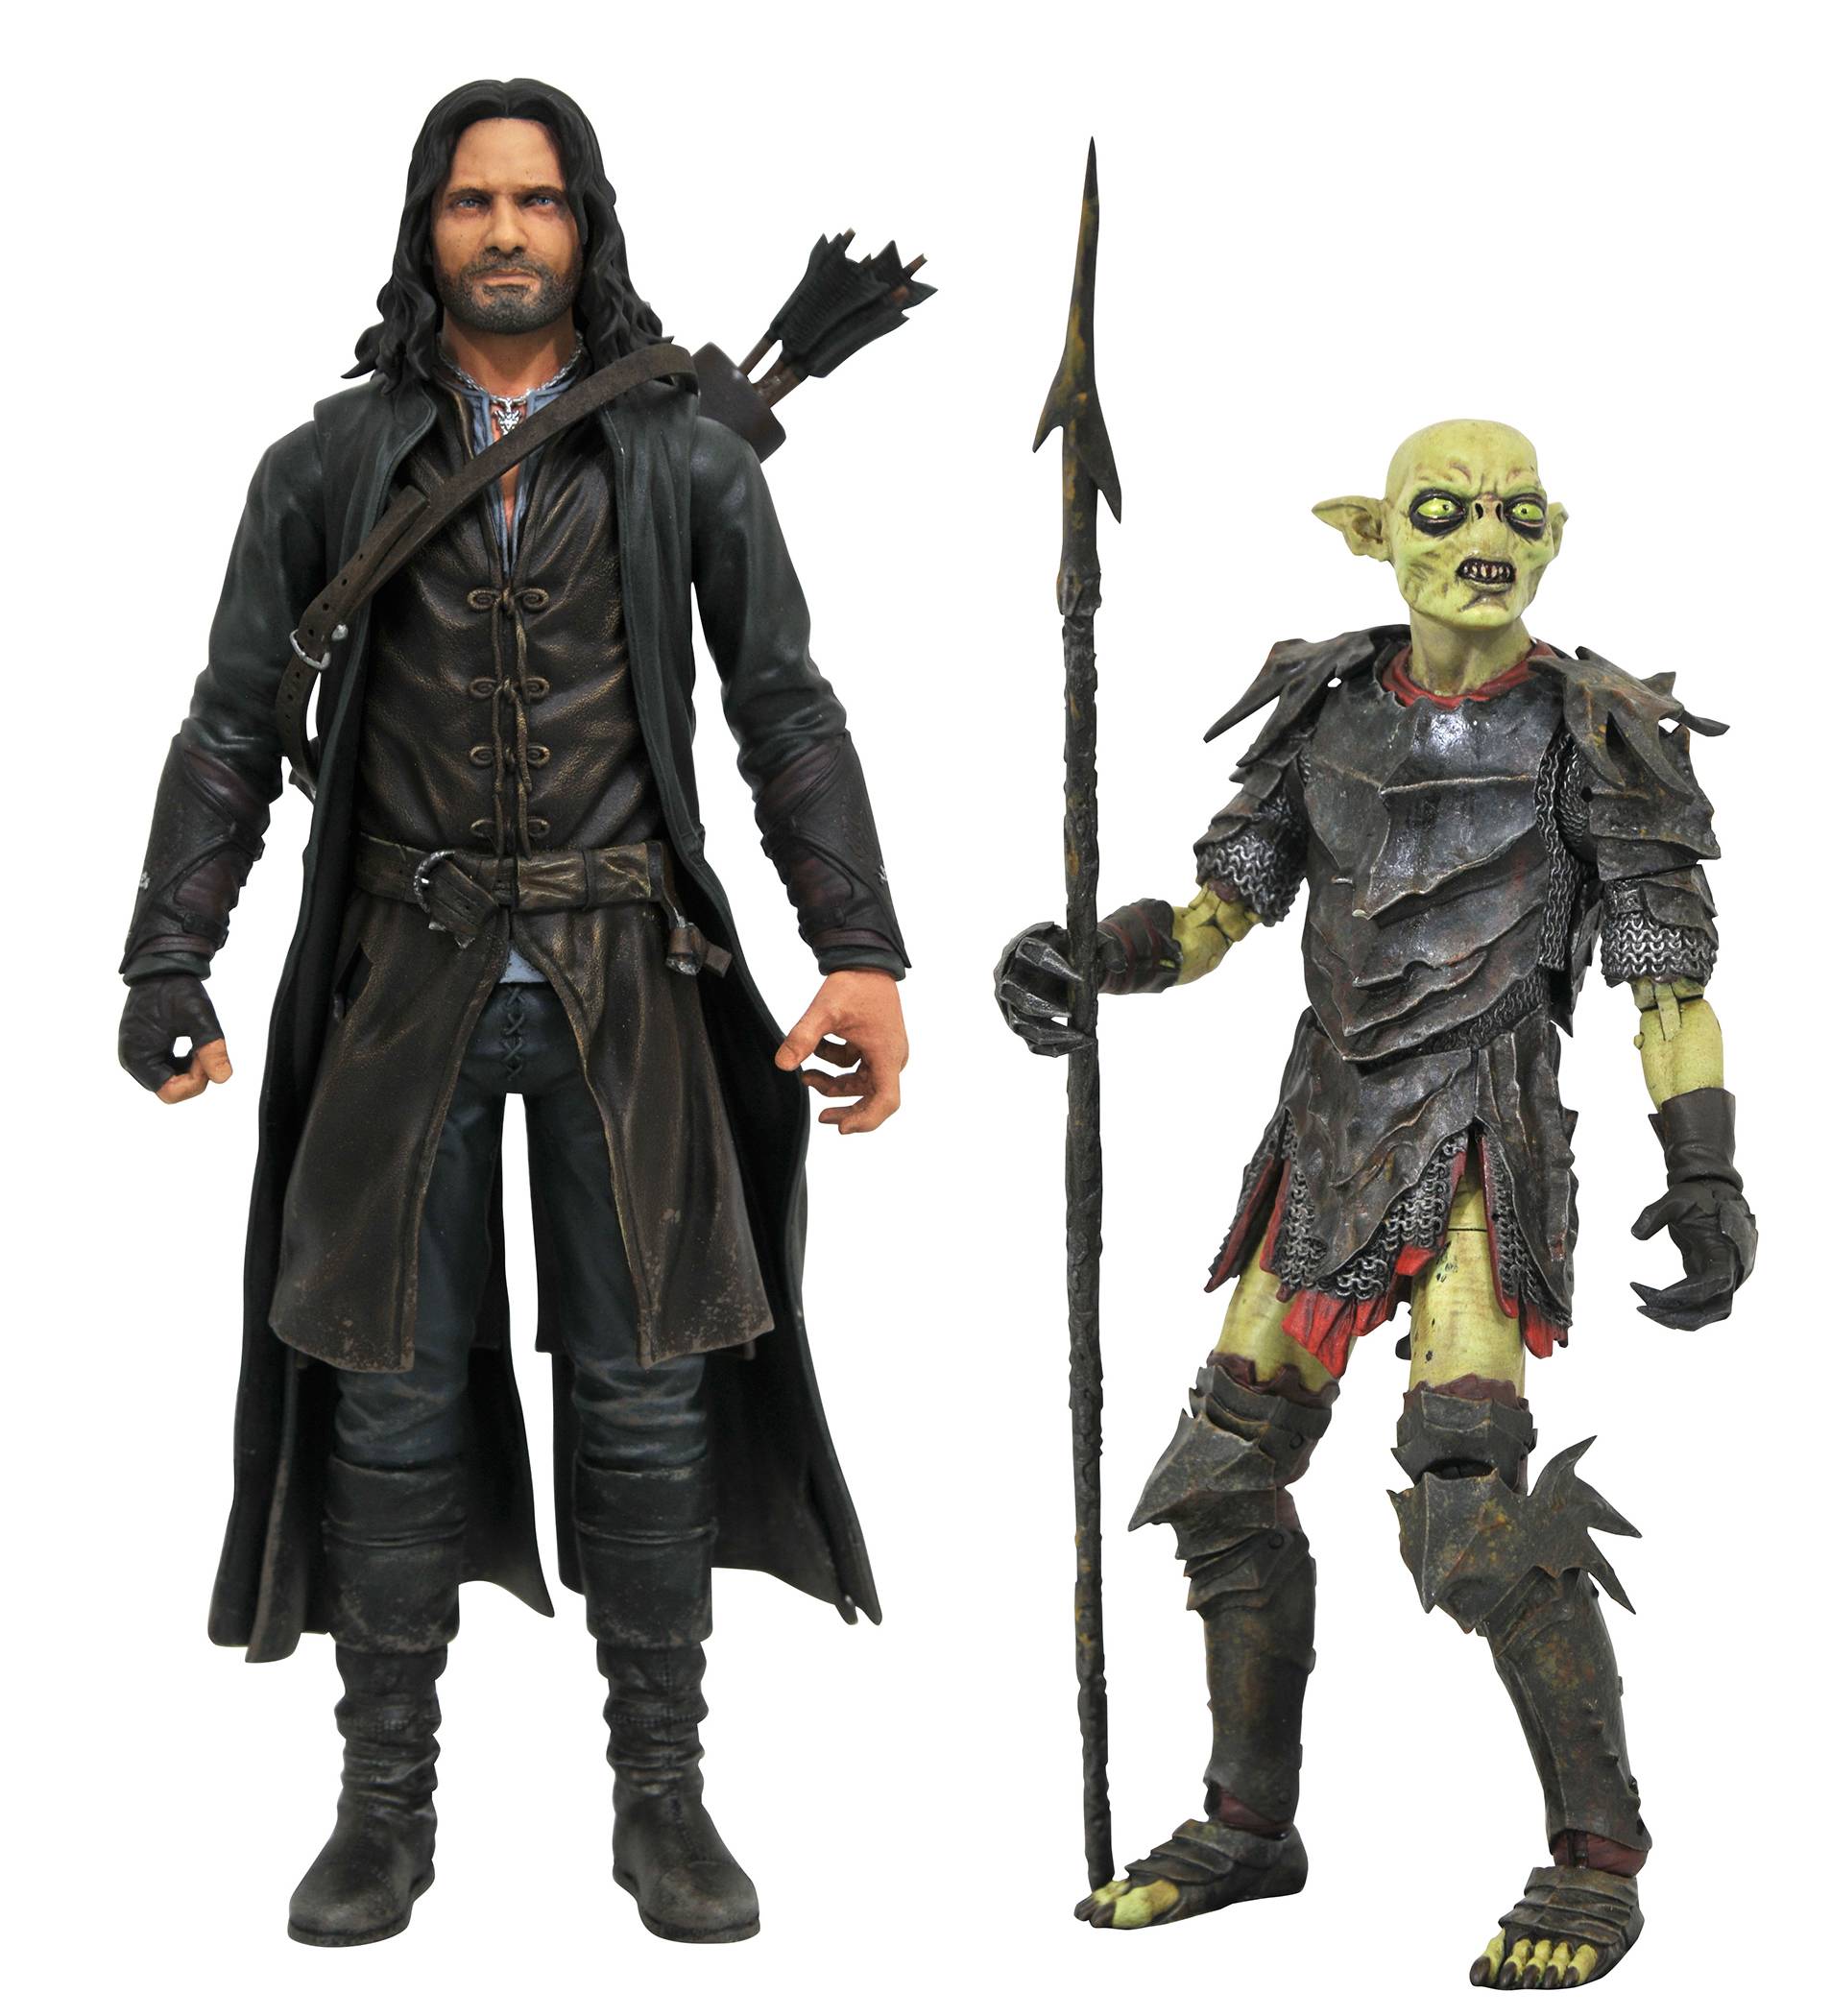 LORD OF THE RINGS DLX SERIES 3 FIGURE ASST